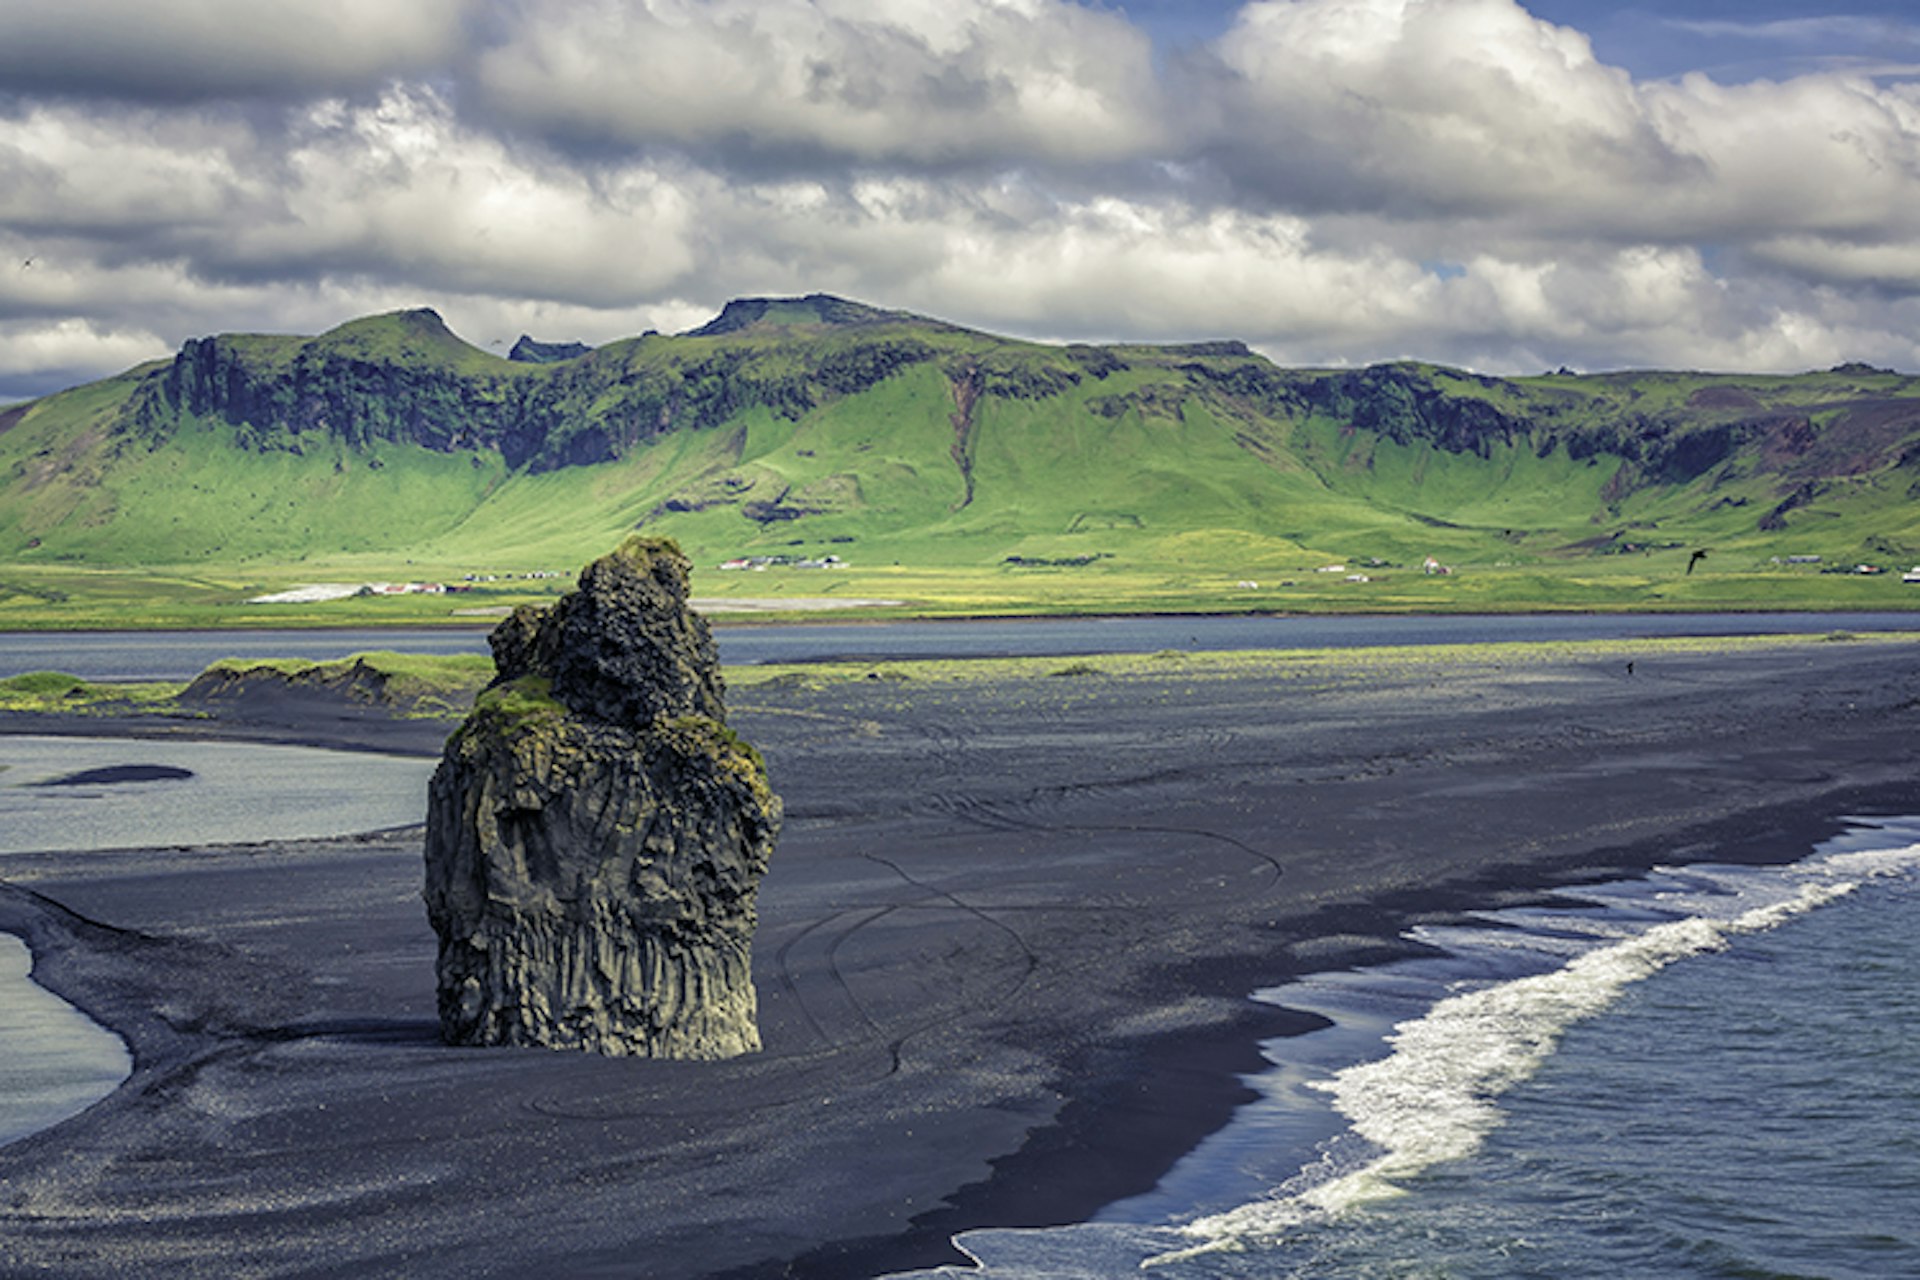 Gothic and other-worldly: Iceland's Vik Beach. Image by marchello74 / Shutterstock